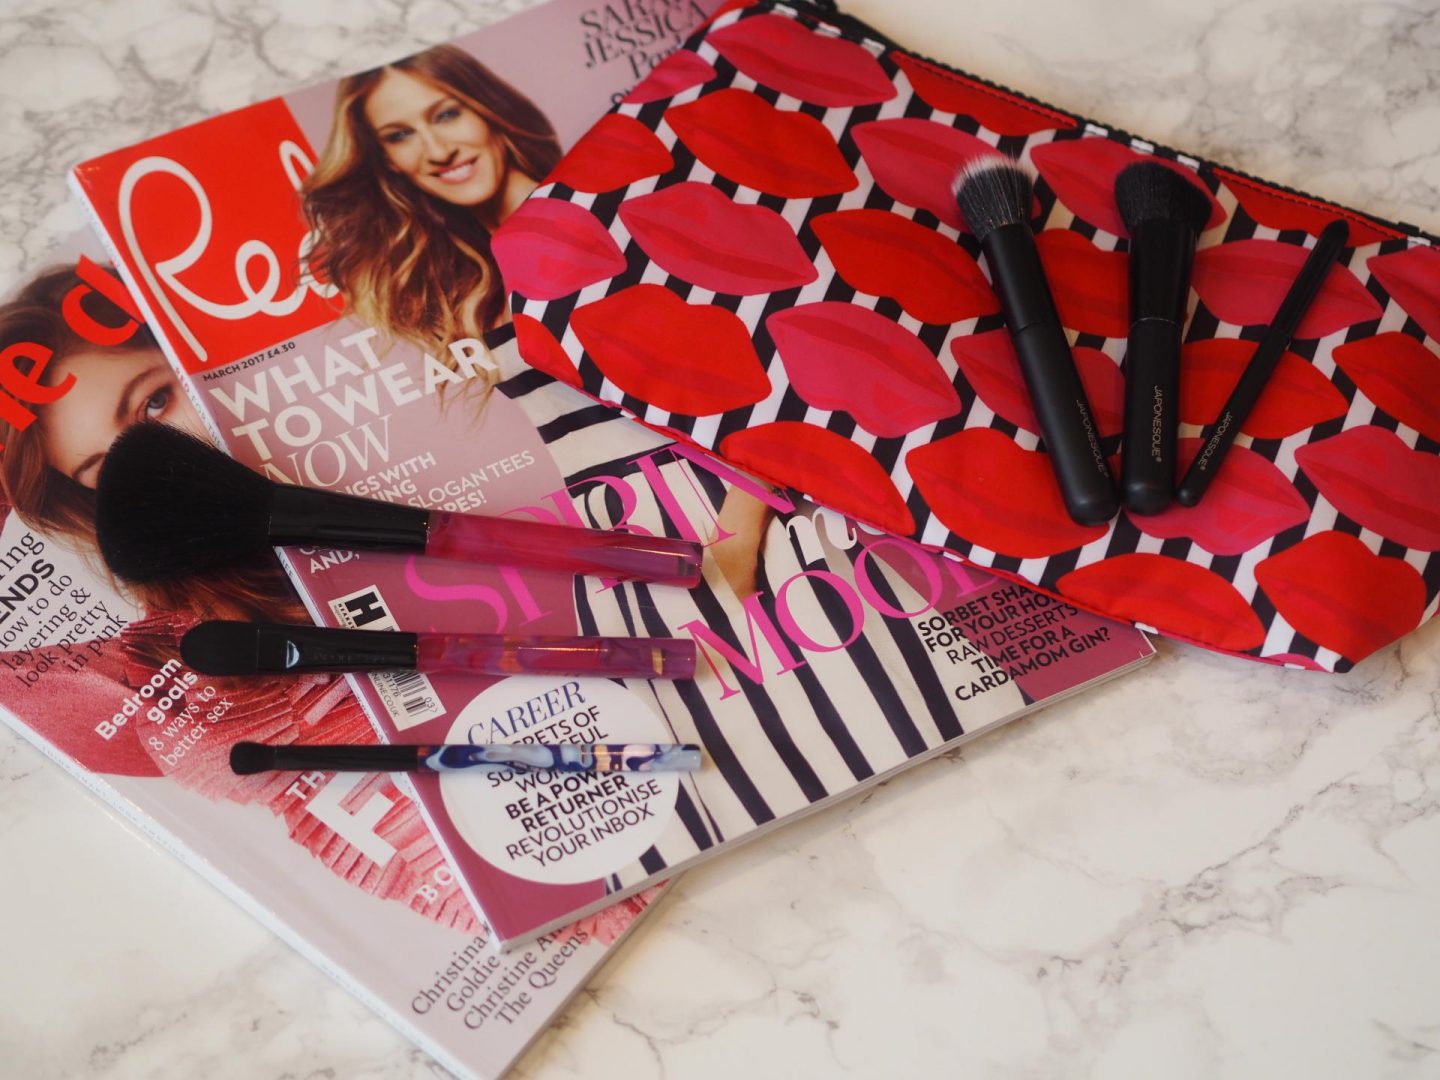 ASOS beauty and make-up haul and Japonesque Color Collection Brushes